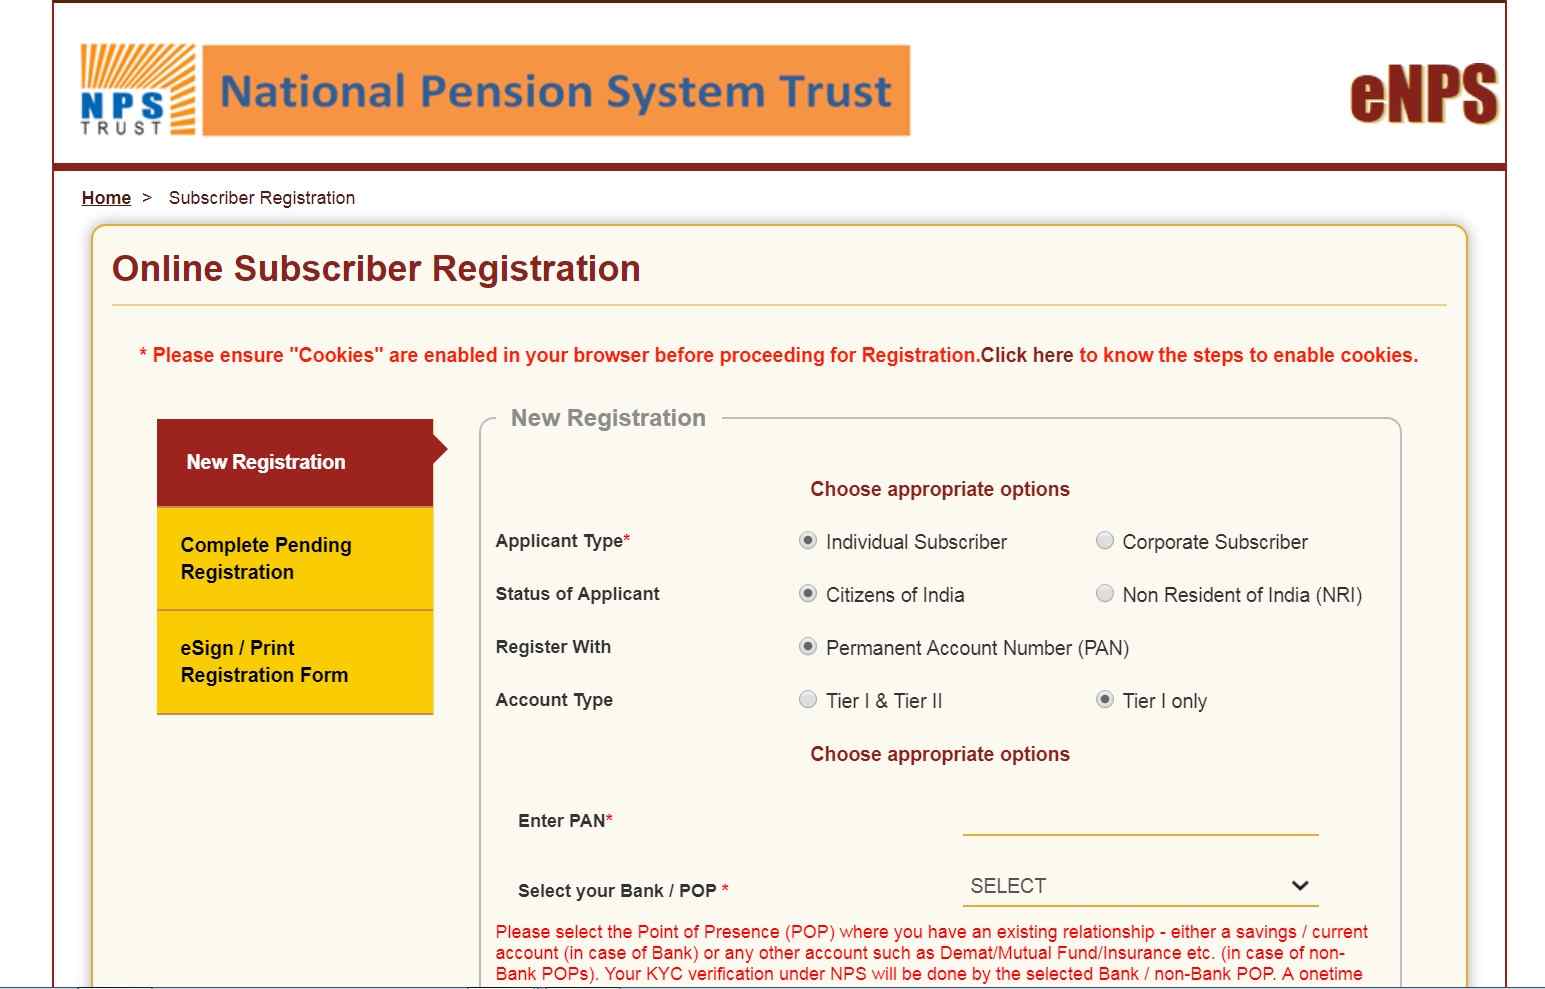 National Pension System Trust